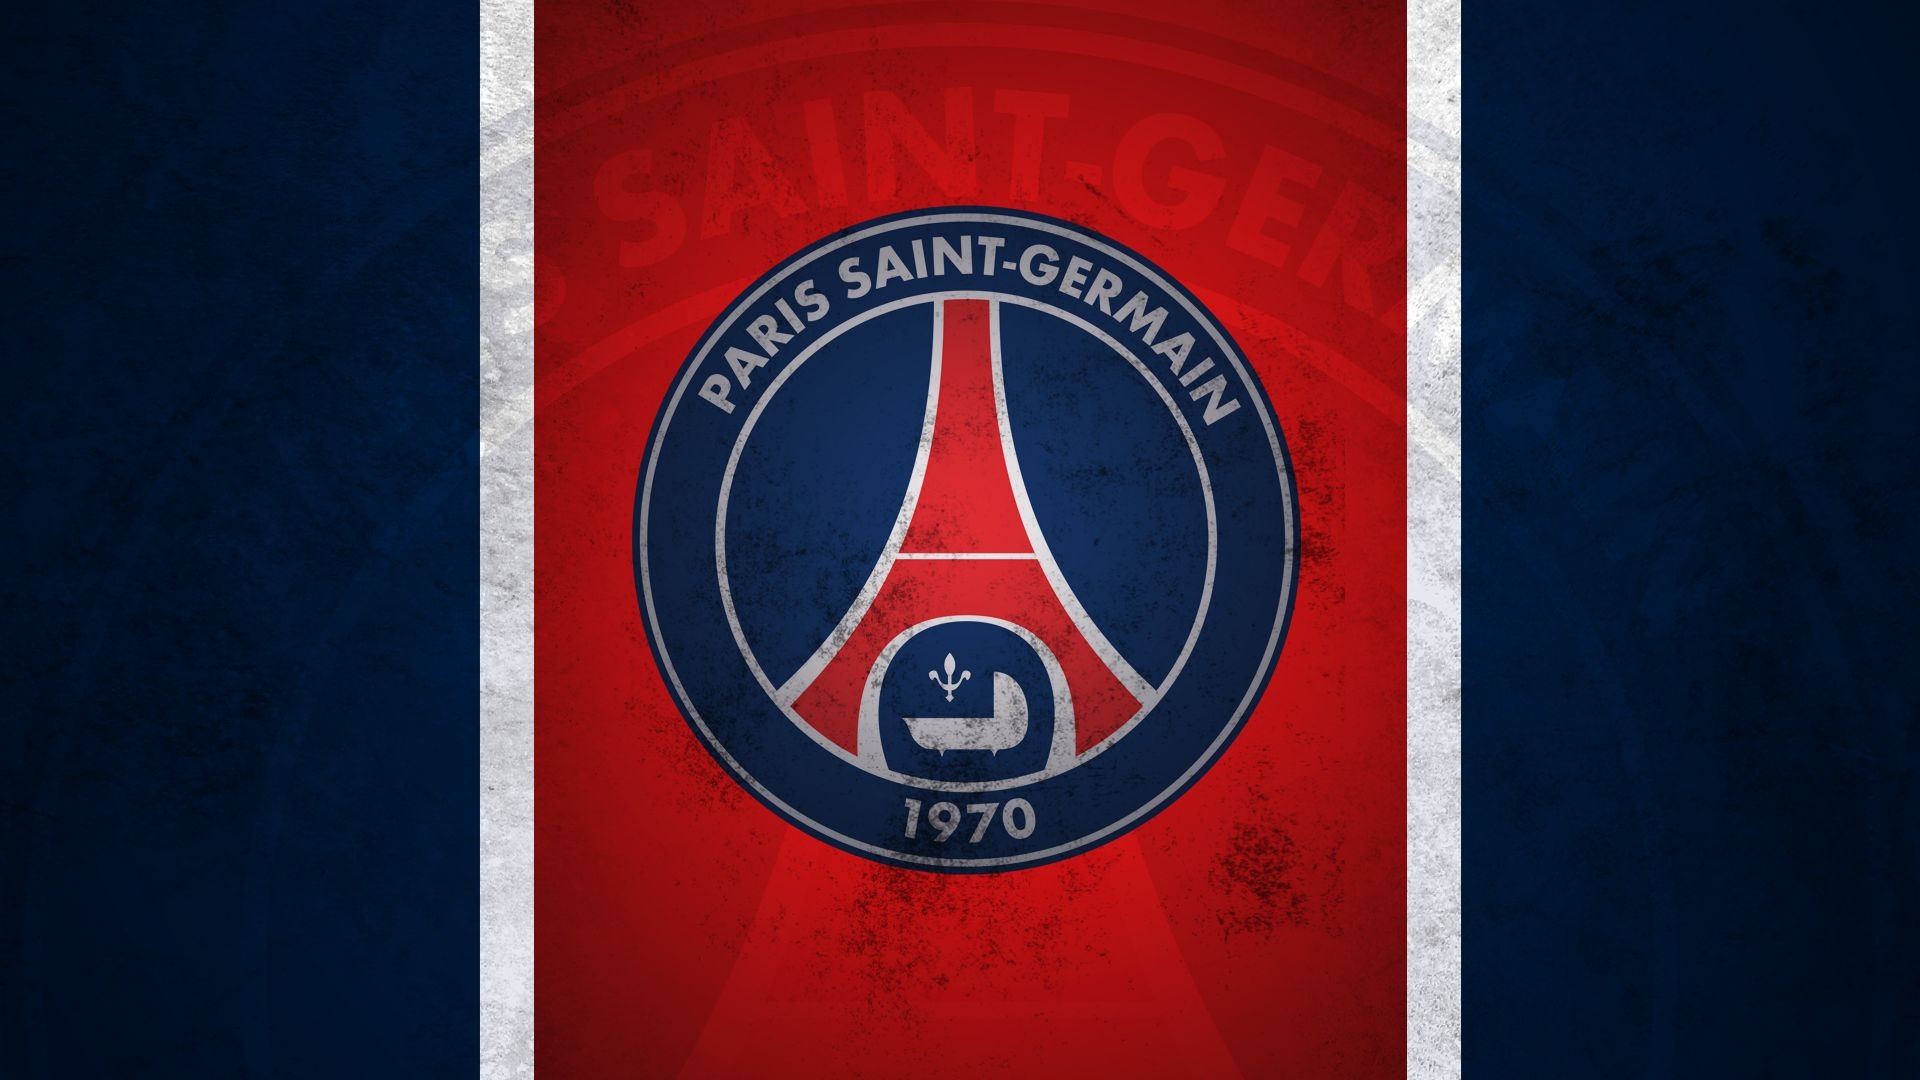 Paris Saint-Germain: The Red-and-Blues, Football team. 1920x1080 Full HD Background.